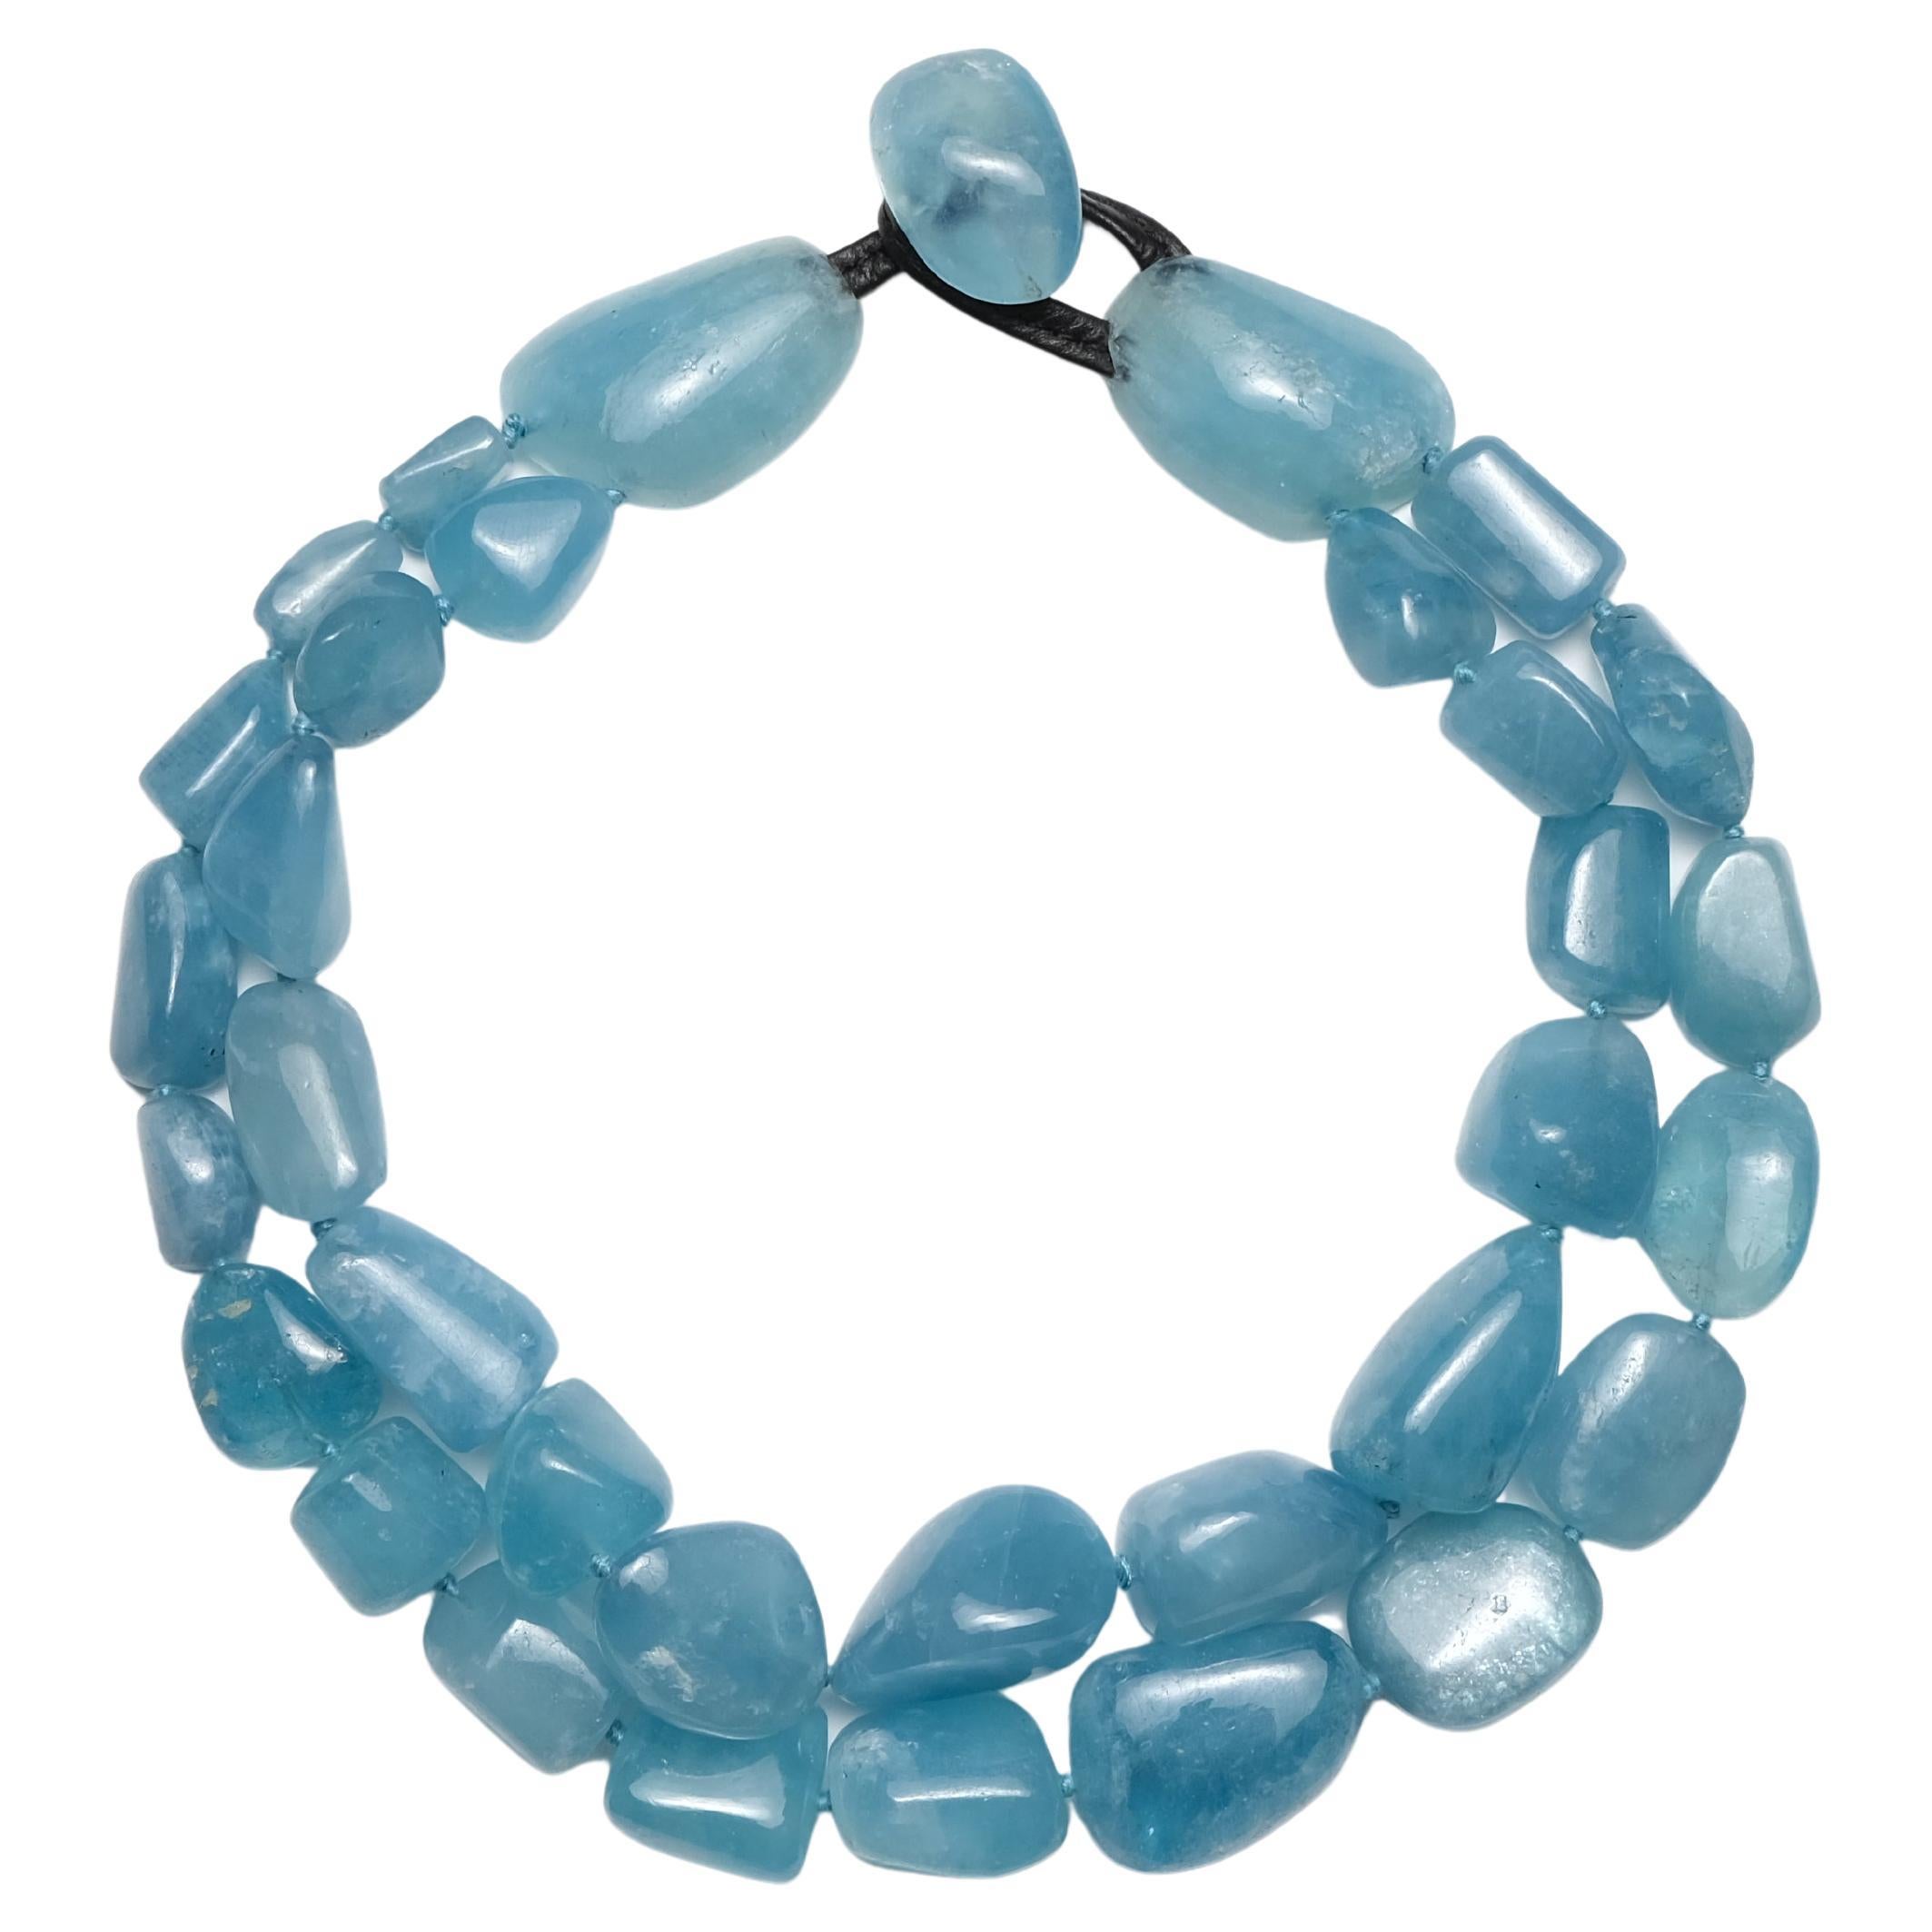 One-of-a-kind Necklace in Aquamarine from the Danish Brand Monies For Sale